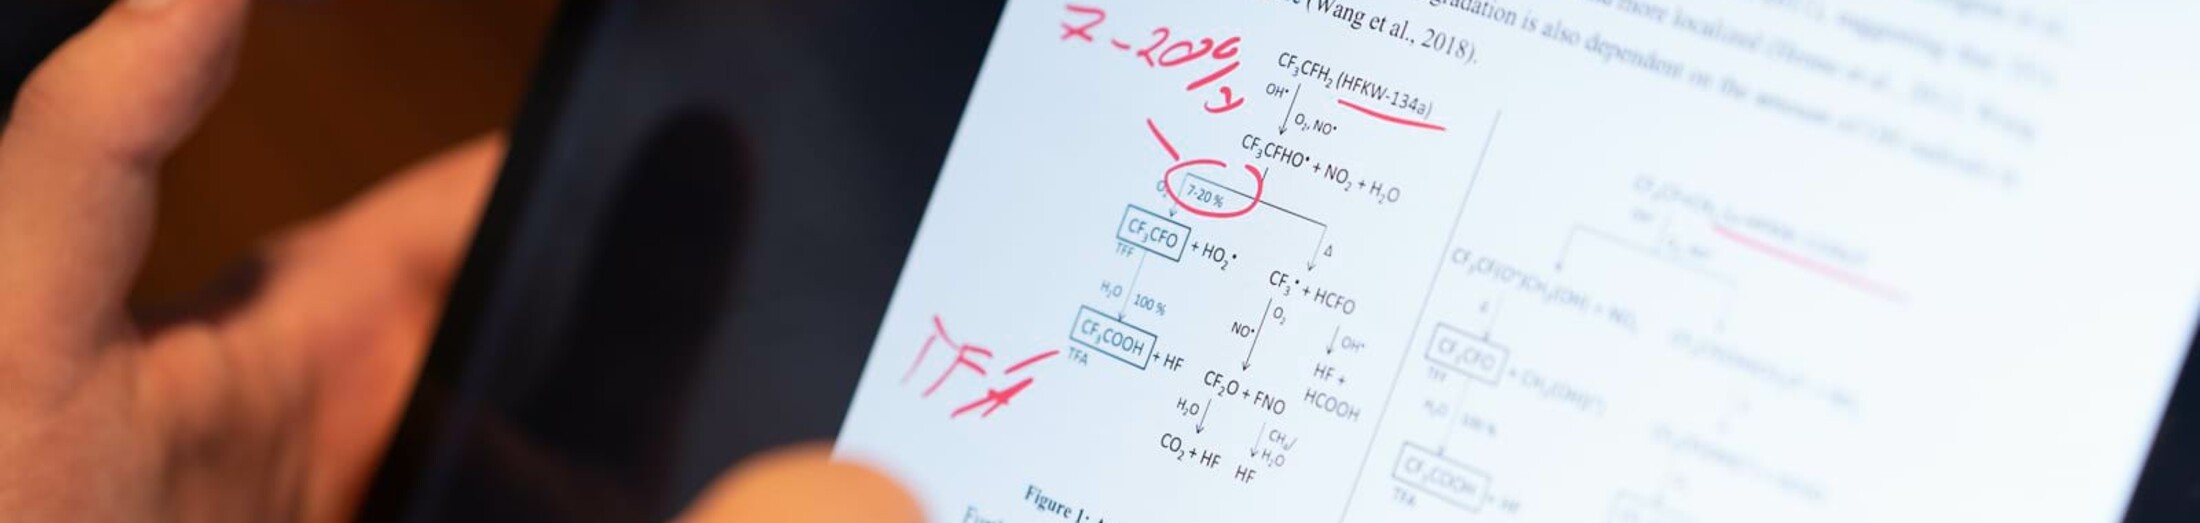 structural formula of organic compounds on a tablet